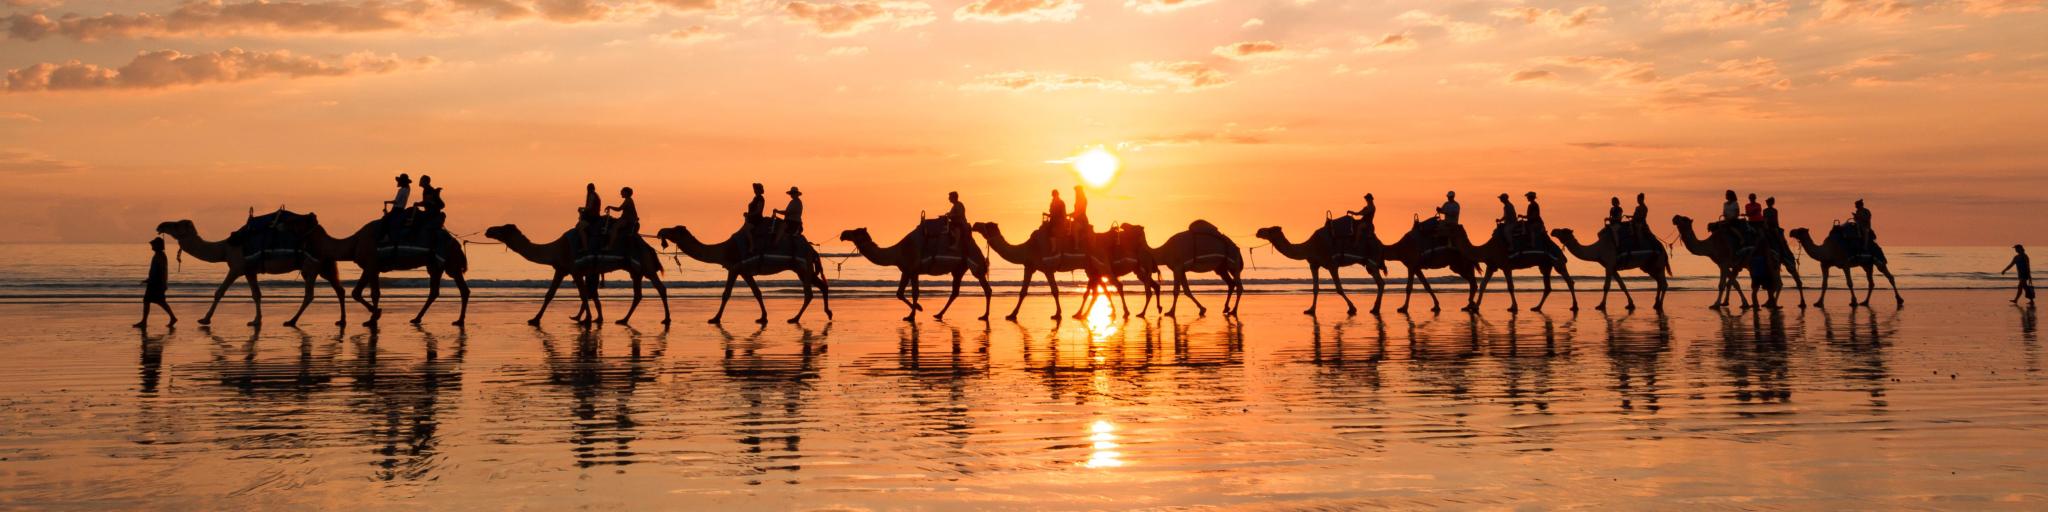 Famous Broome Camel ride during a golden sunset on Cable Beach